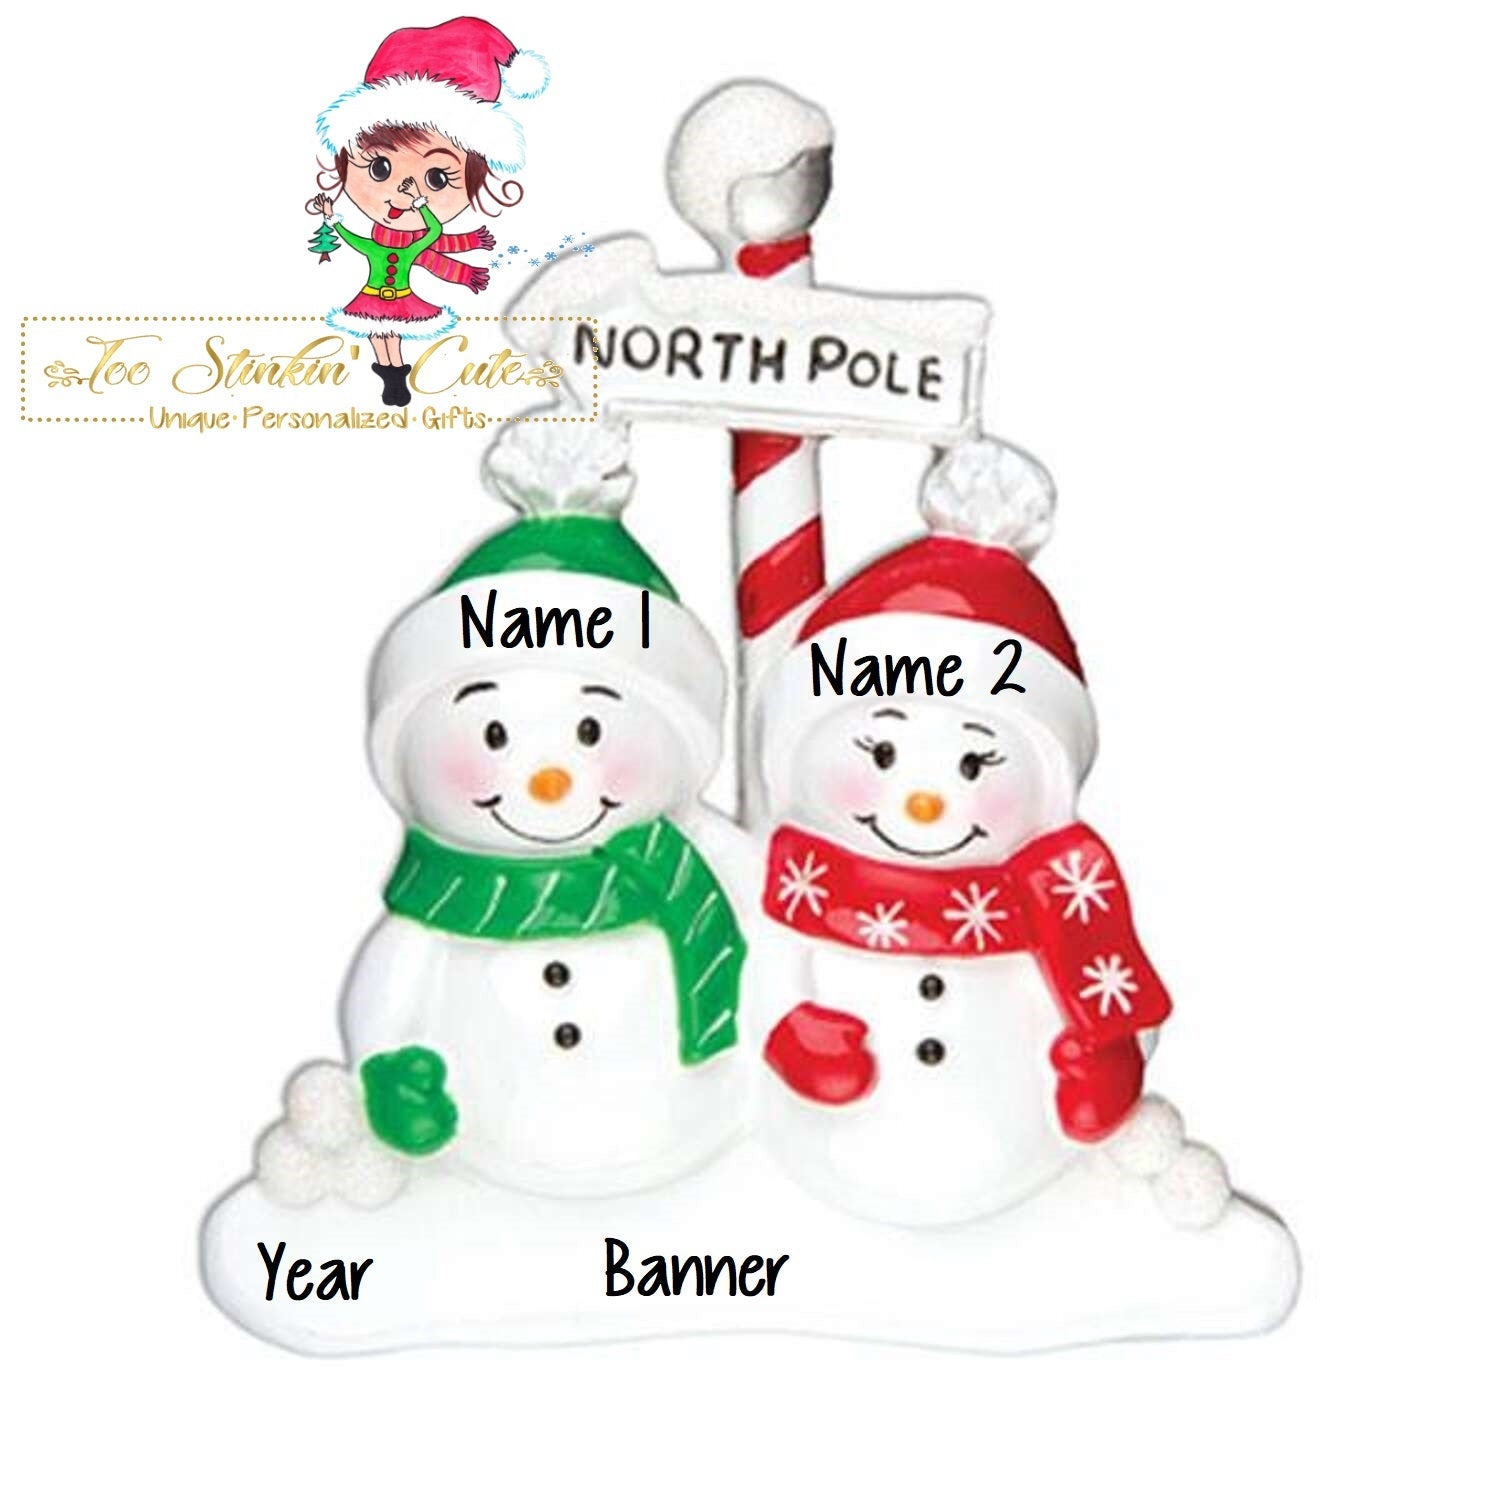 Christmas Ornament Snowman Family of 2 North Pole/ Couple/ Friends/ Coworkers - Personalized + Free Shipping!